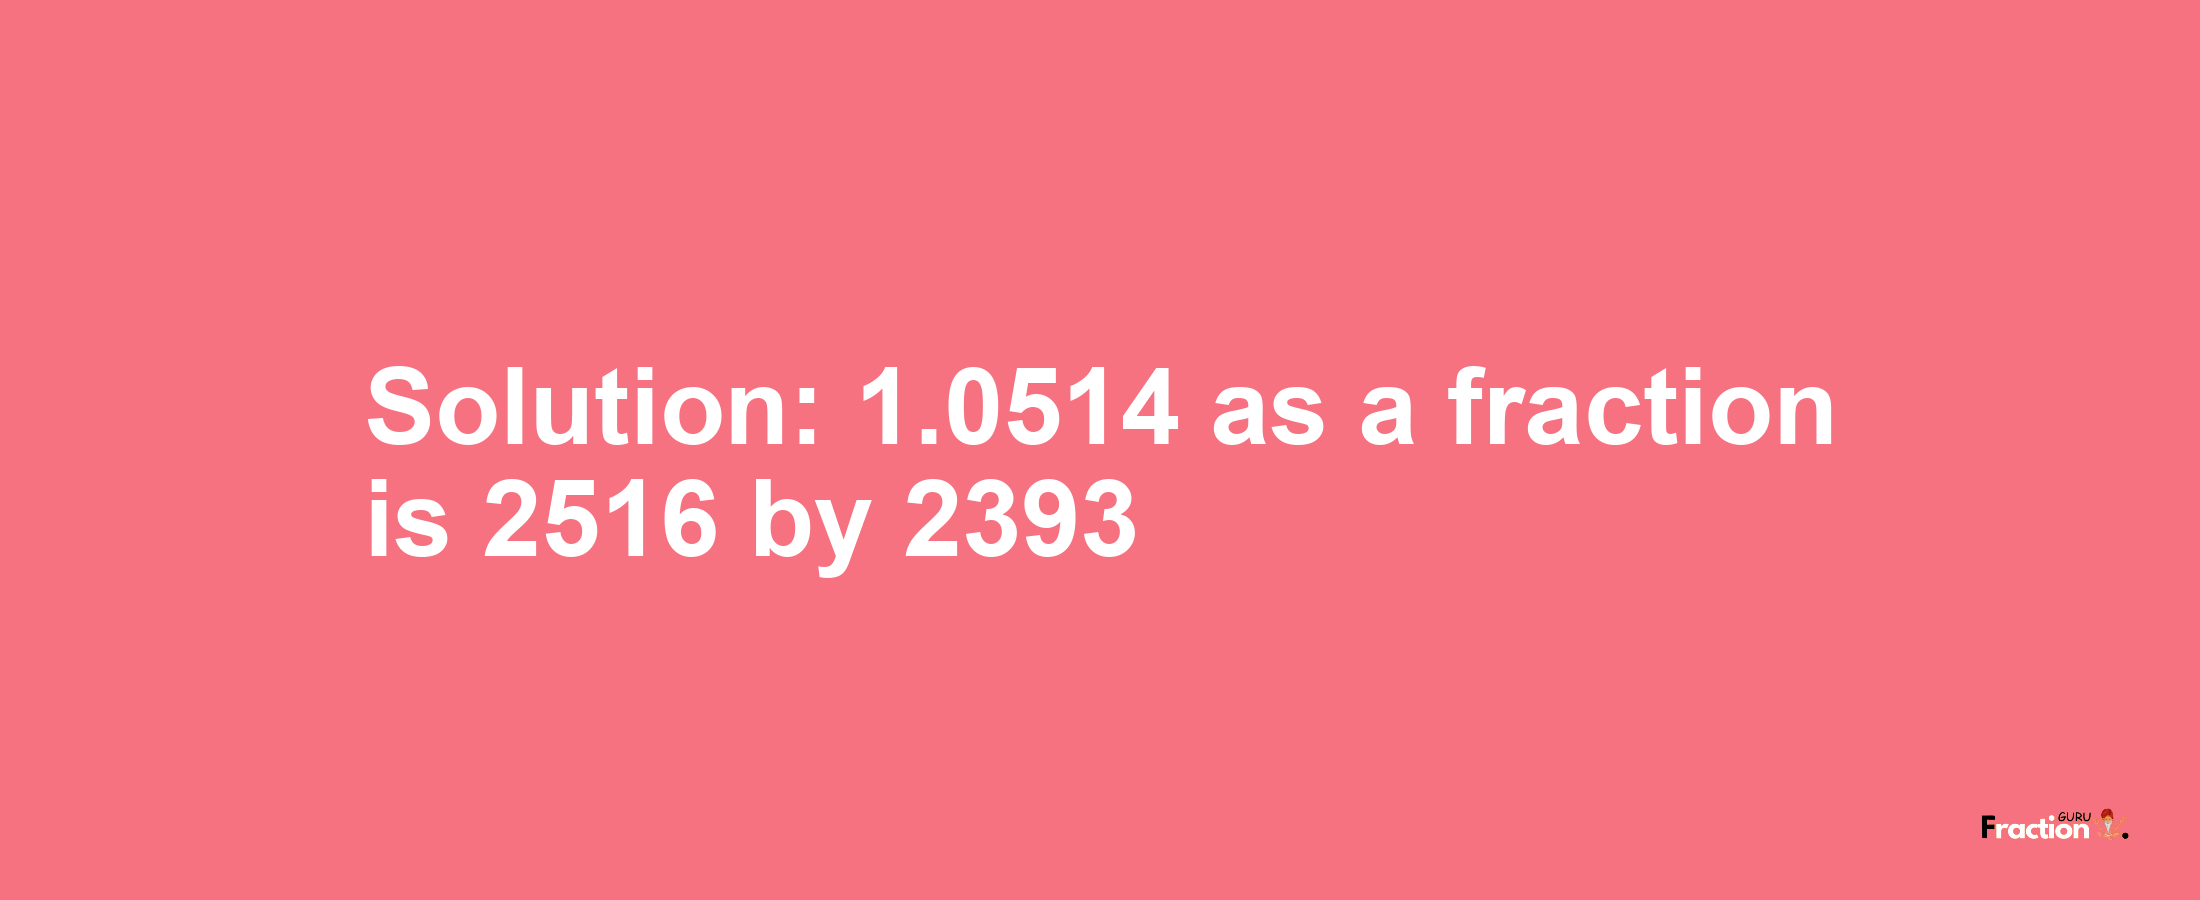 Solution:1.0514 as a fraction is 2516/2393